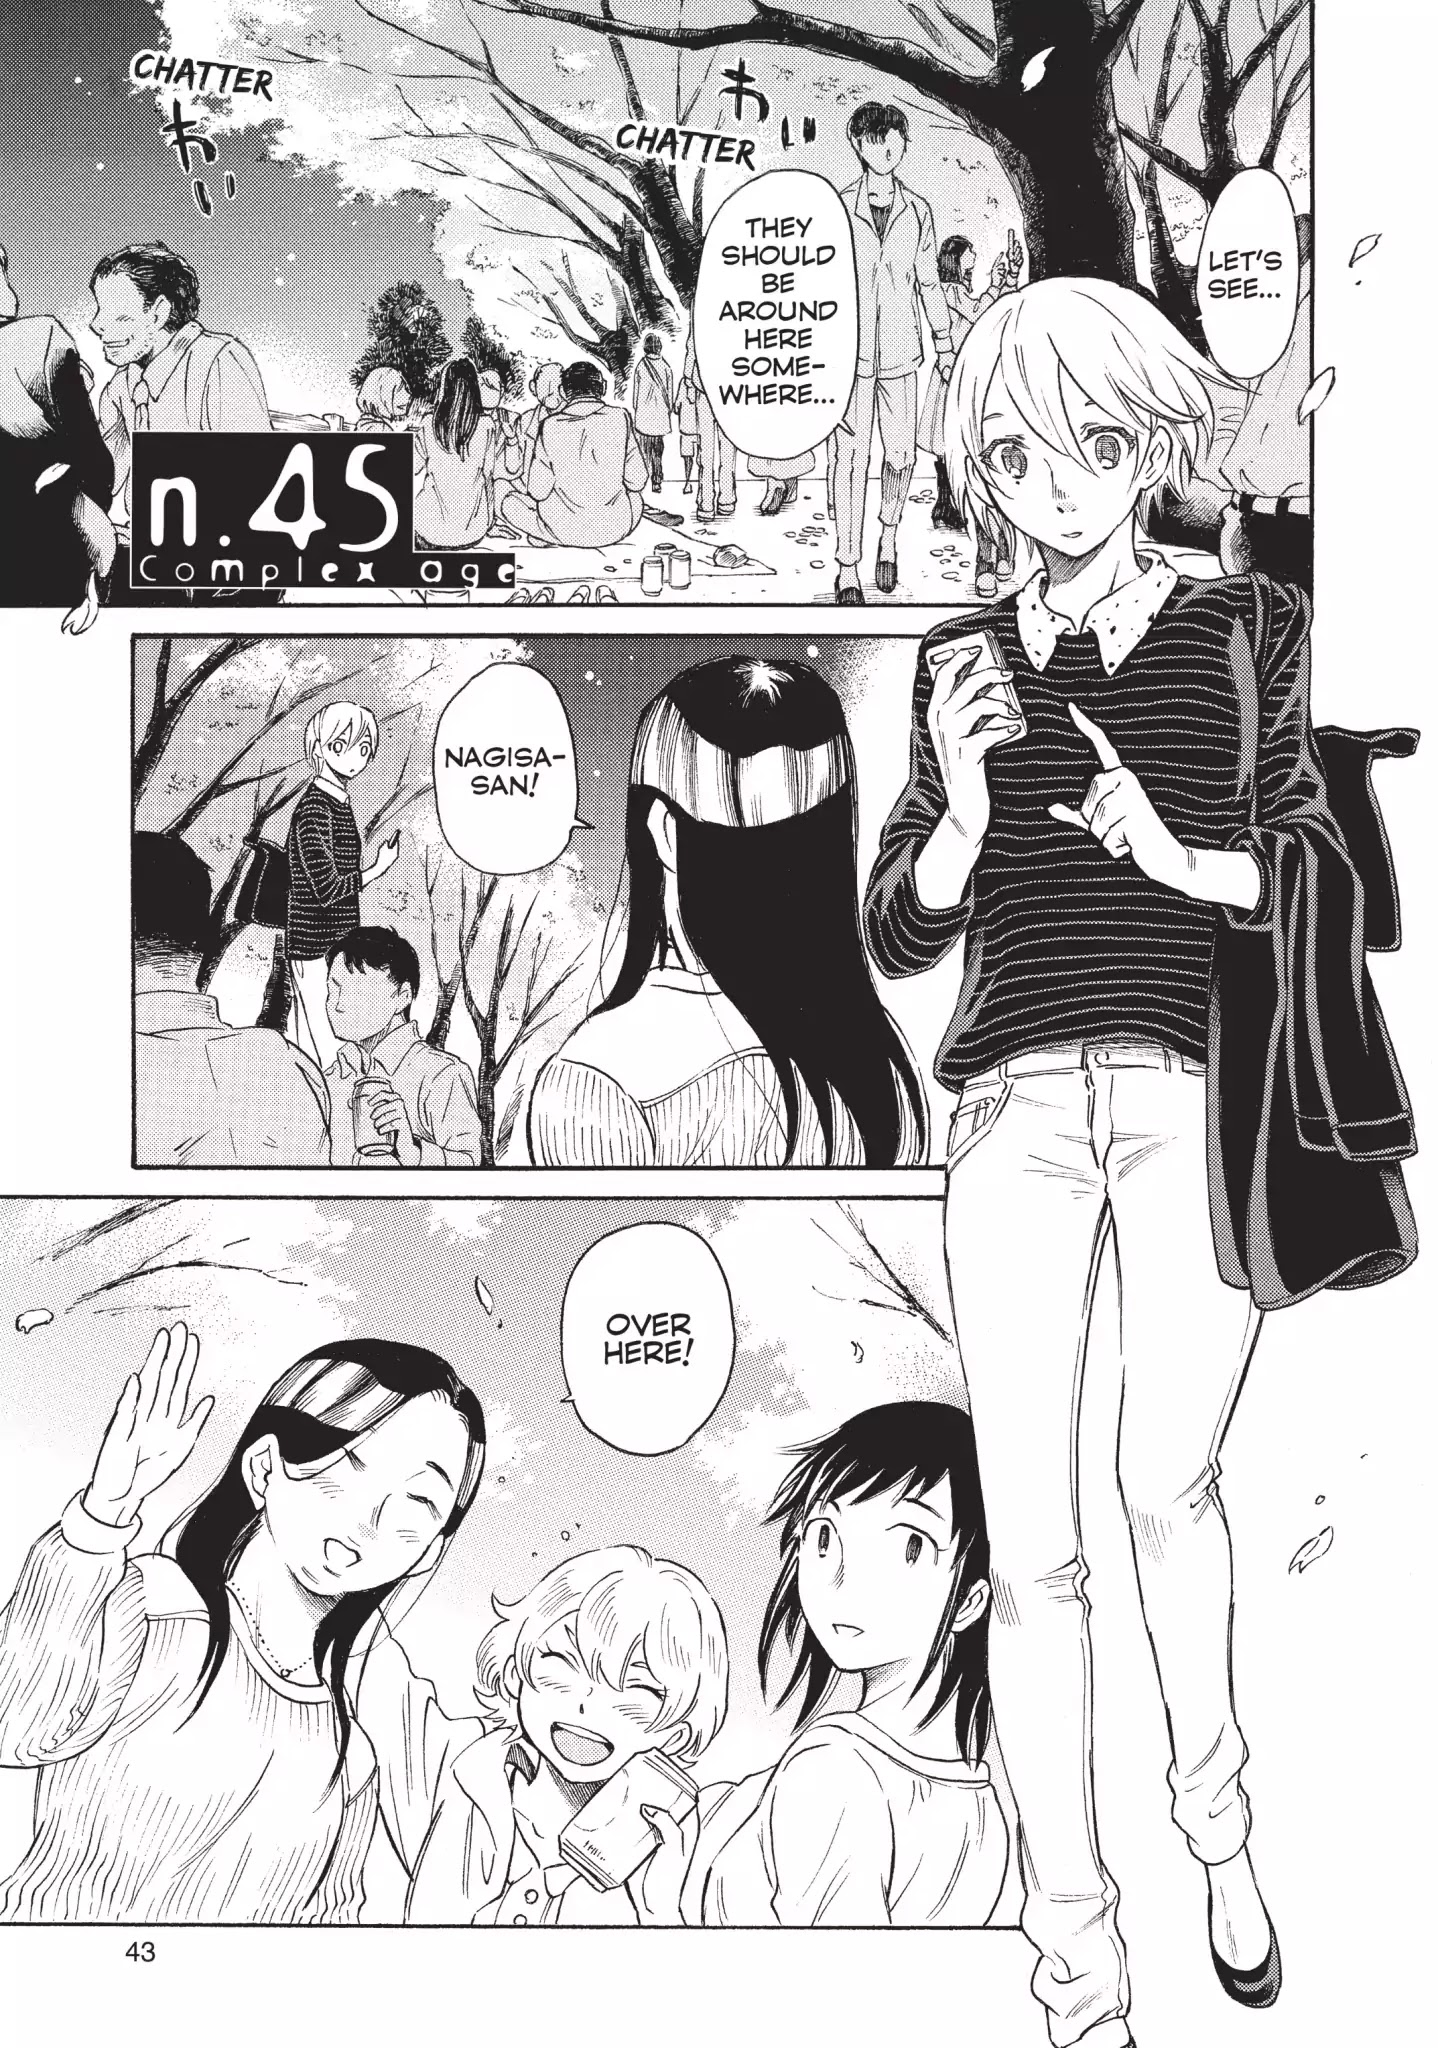 Complex Age Chapter 45 #1